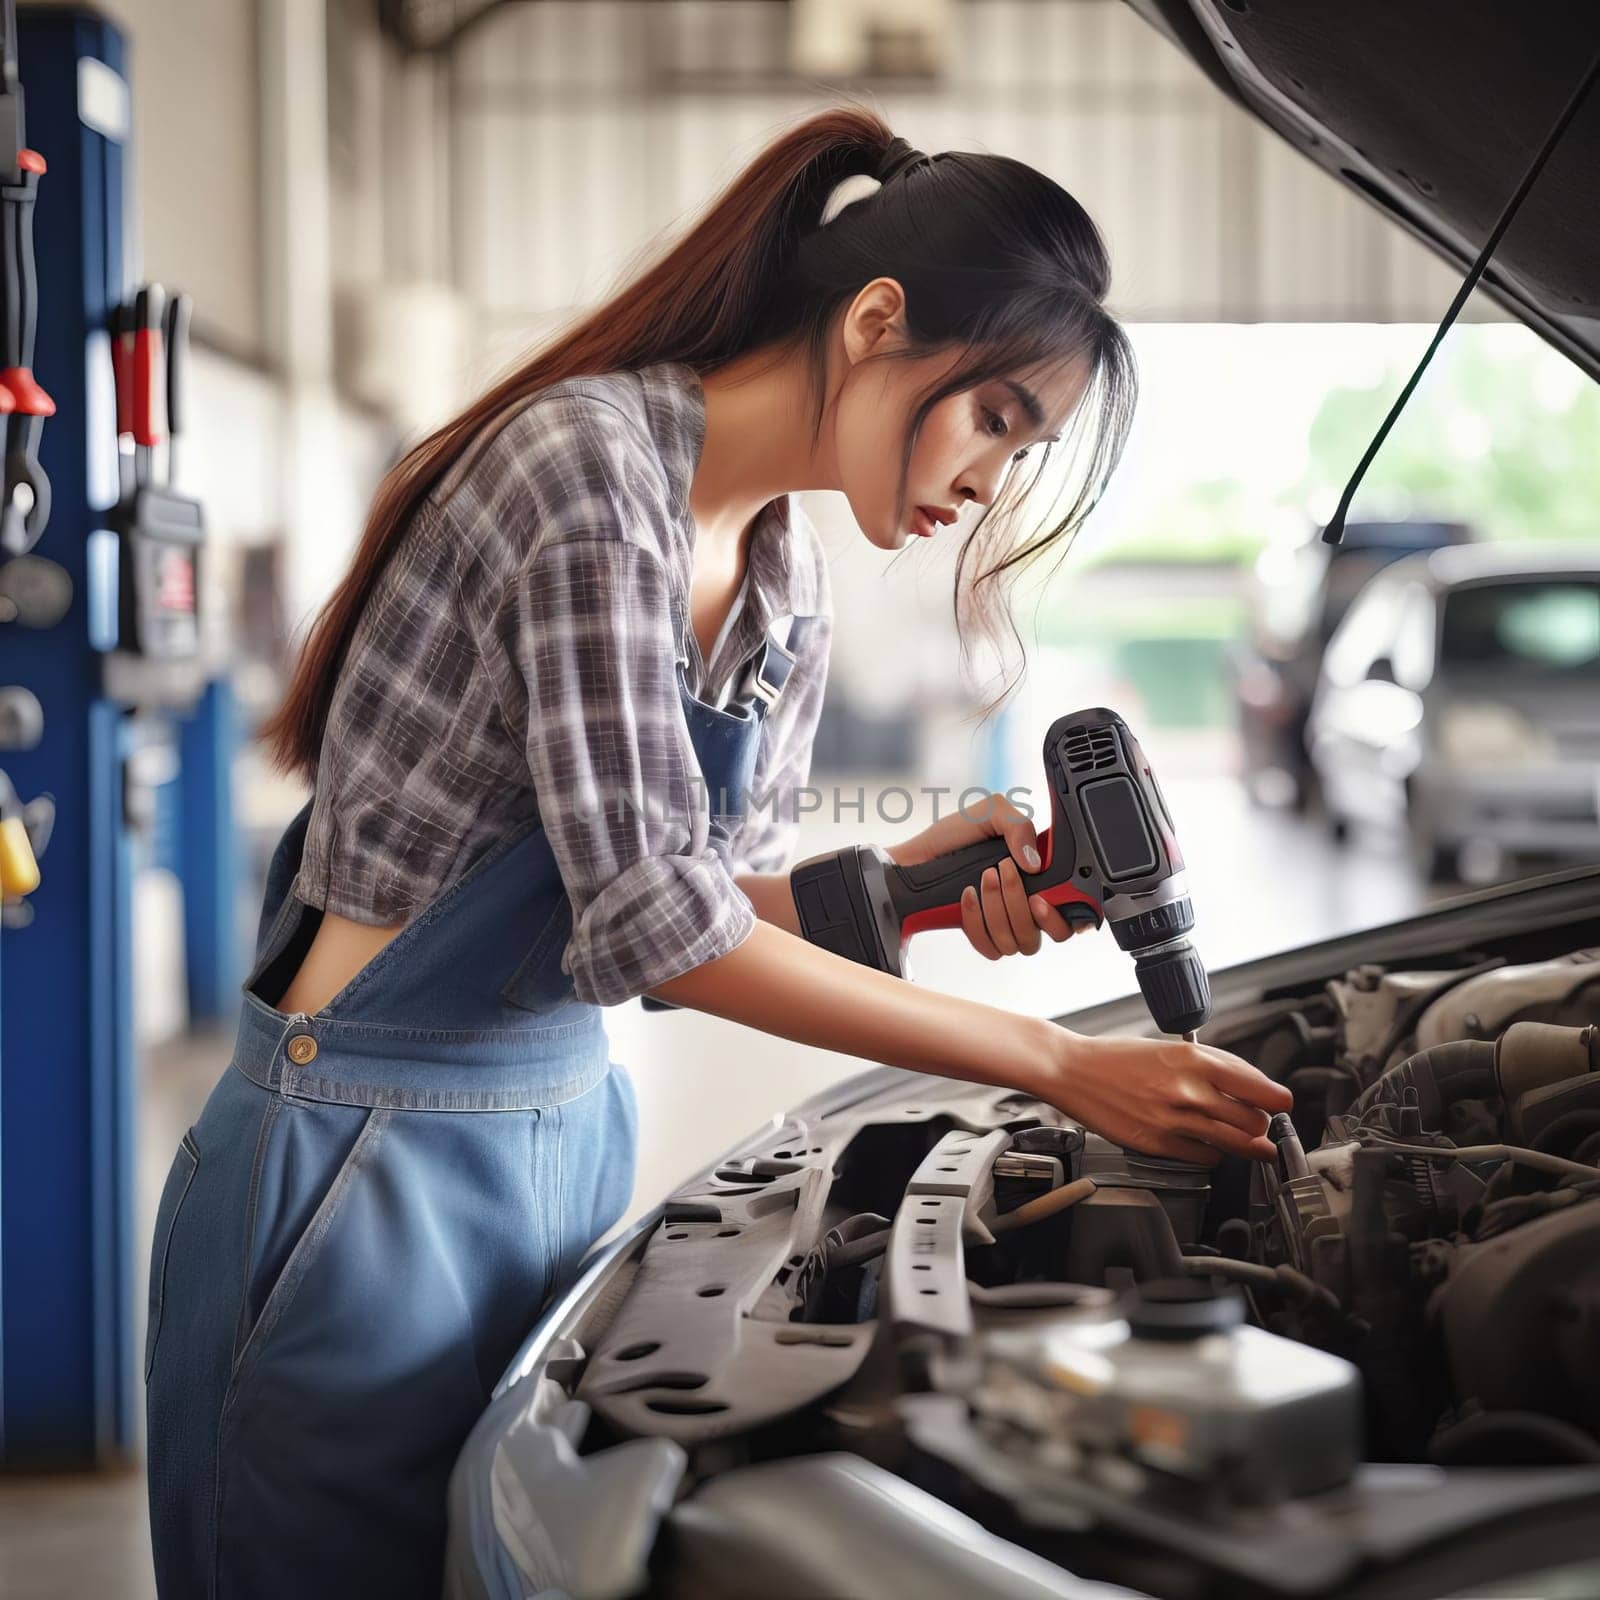 Pretty asian woman in a plaid shirt and jeans overalls is working on a car engine in a garage, using a power tool.